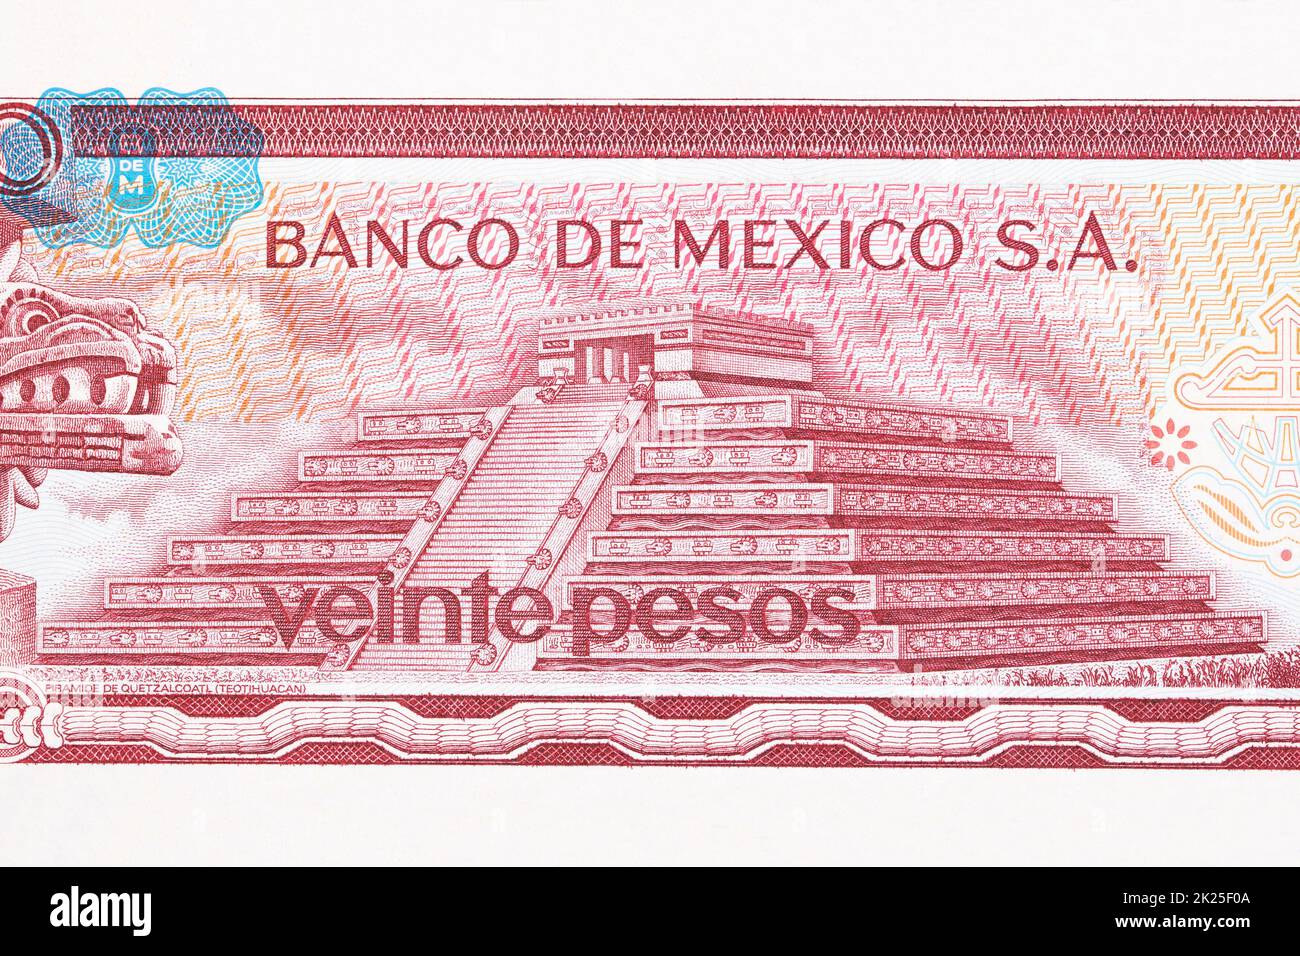 Pyramid of the god Quetzalcoatl from old Mexican money Stock Photo